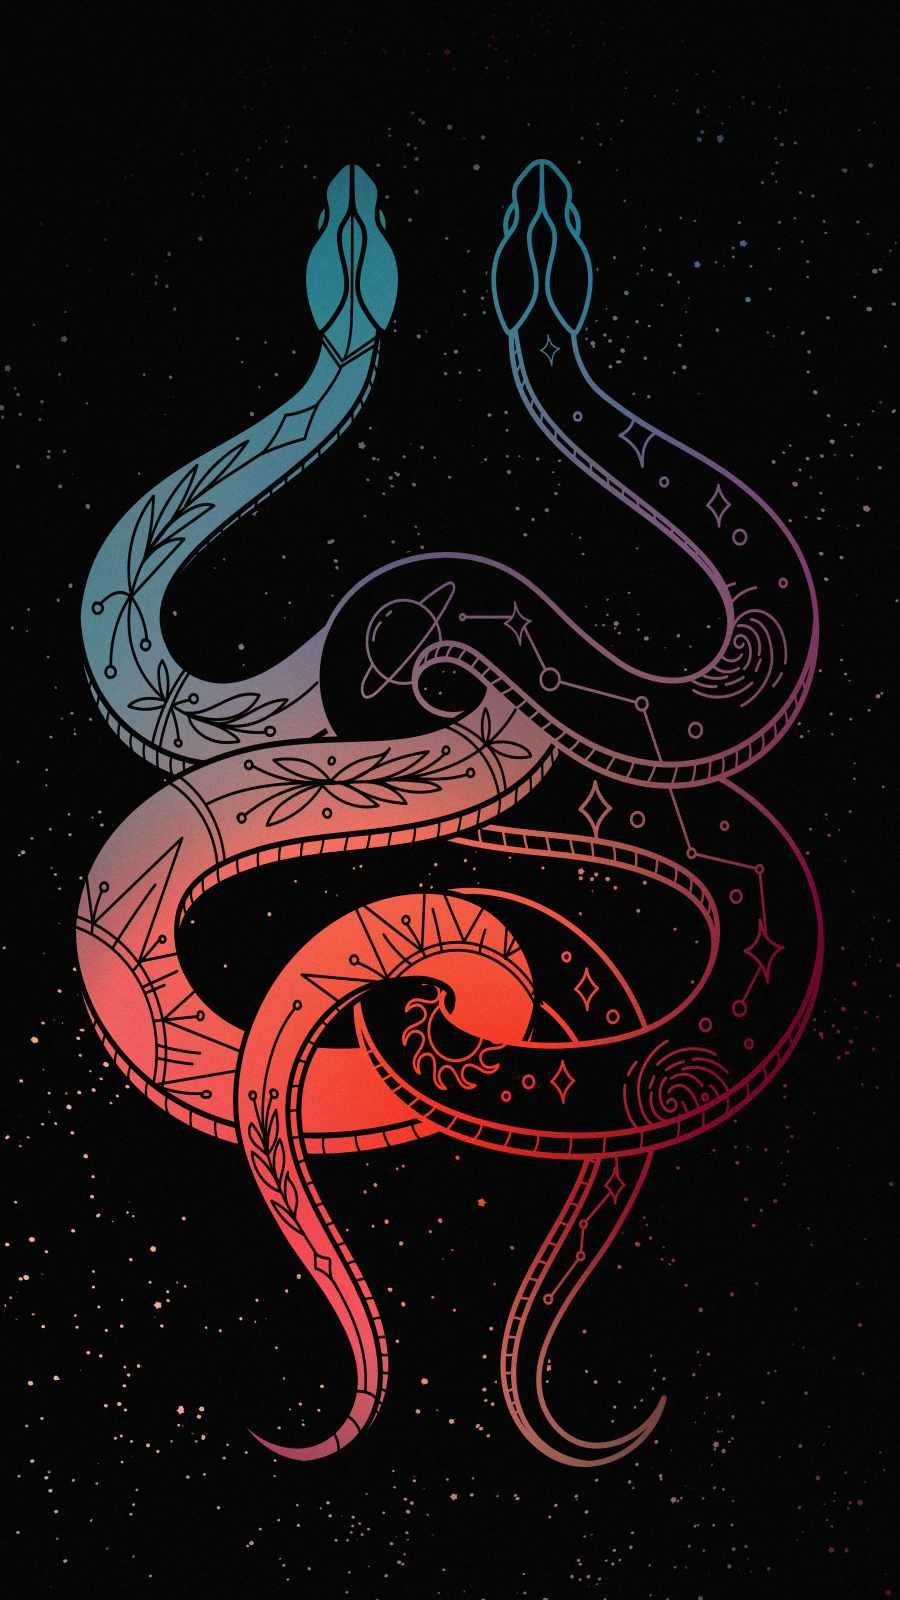 Black Design Wallpaper, iPhone Wallpaper. Witchy wallpaper, Snake wallpaper, Snake art